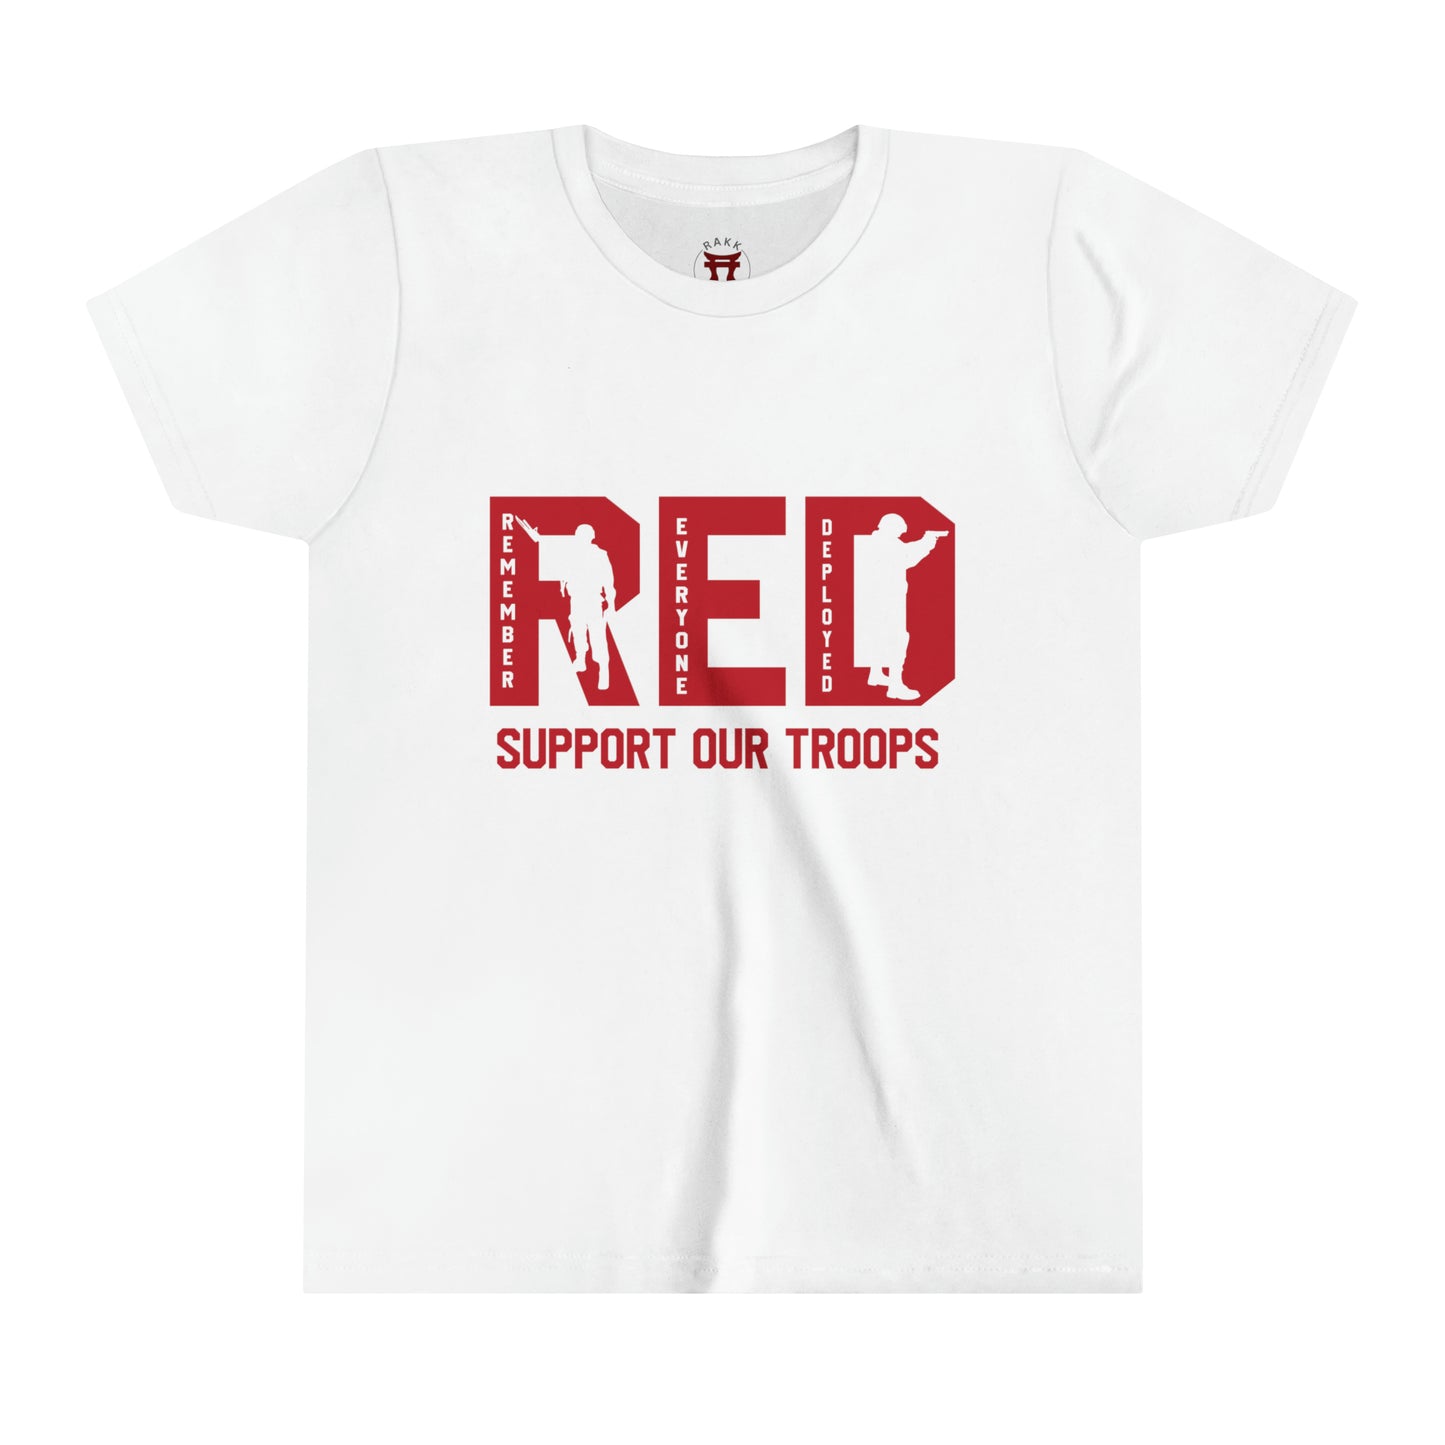 Rakkgear Youth "Remember Everyone Deployed" White Tee: Black t-shirt featuring RED letters with 'Support Our Troops' on the front. Iconic Rakkgear Logo on the upper back.